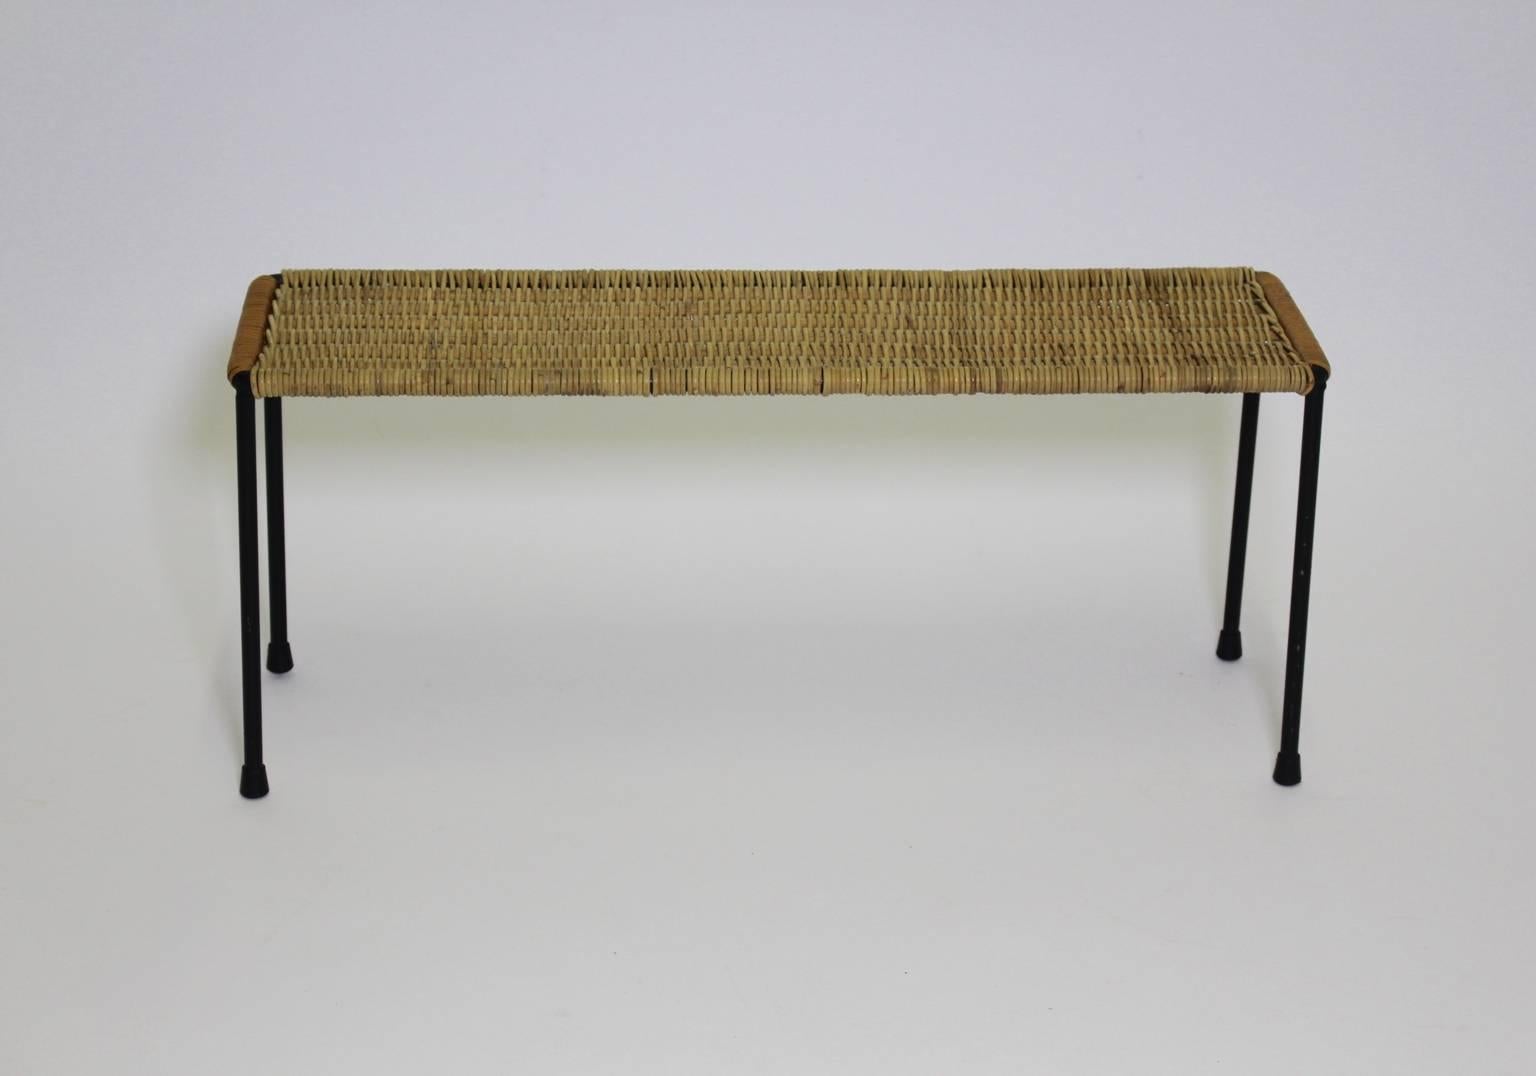 Mid century modern vintage side table of sofa table from rattan and steel designed by Carl Auböck circa 1950s. The side table shows a black painted steel frame and an original wicker top in very good condition.
The side table was designed by Carl